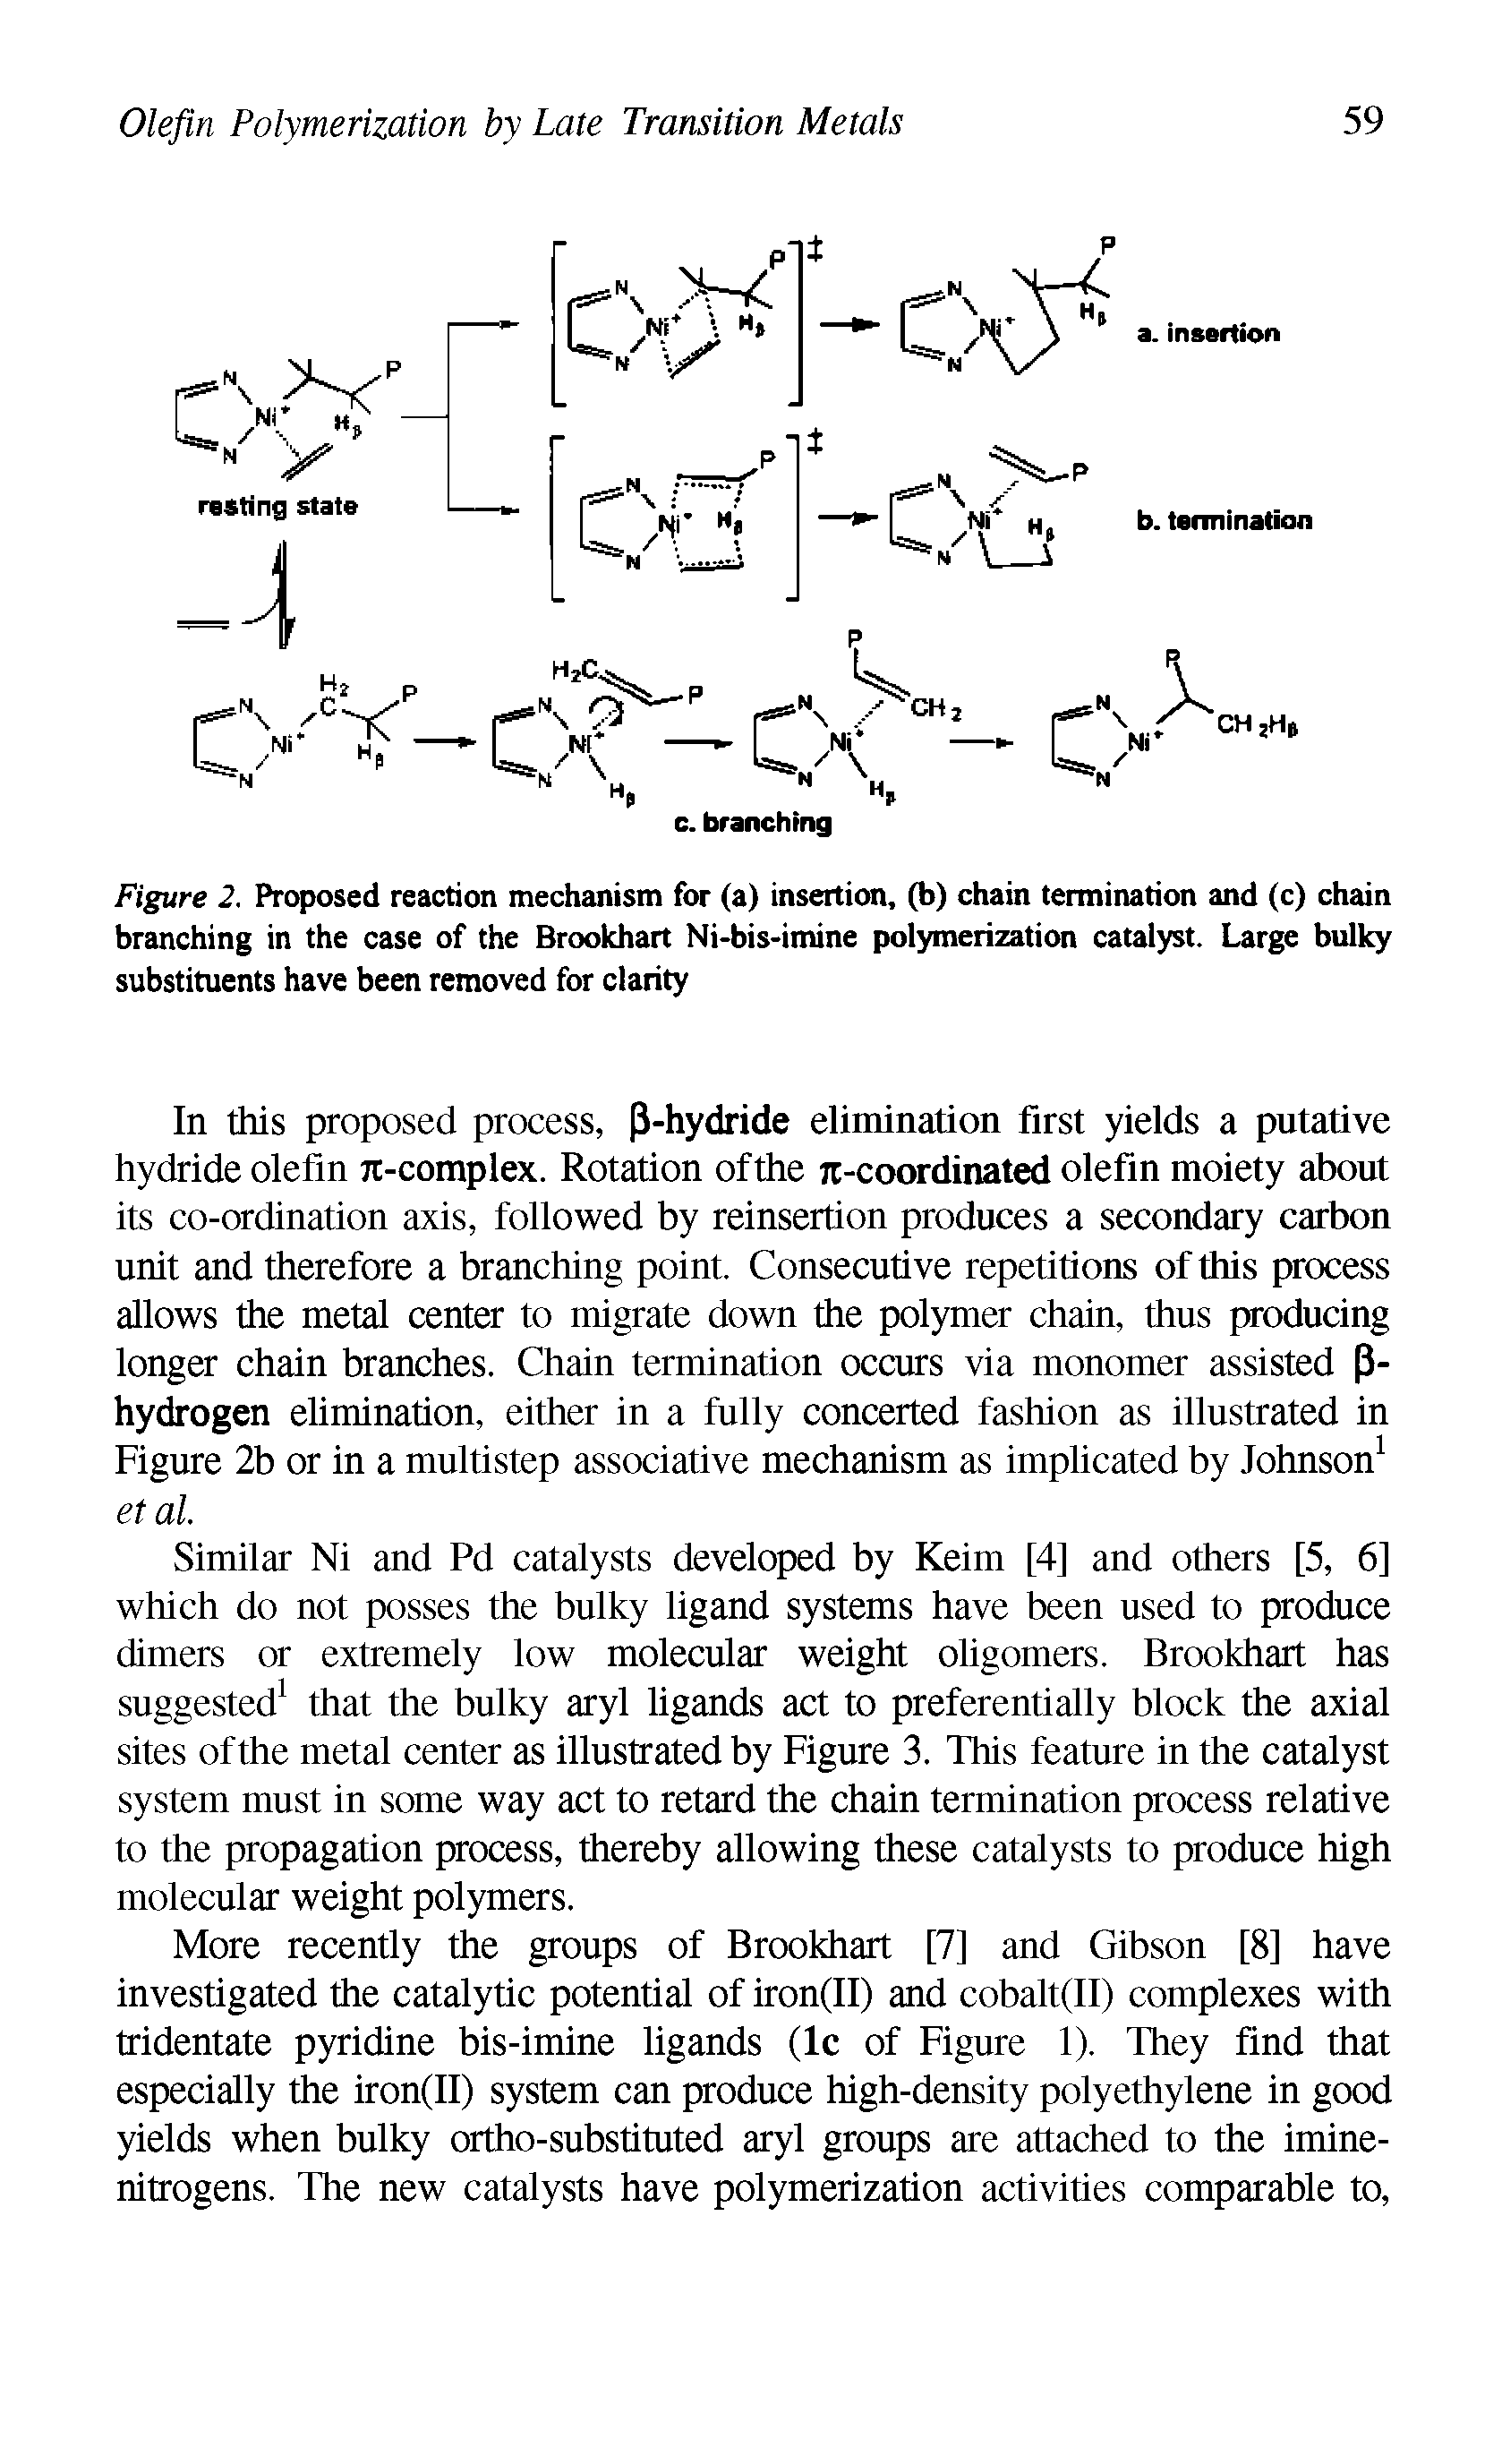 Figure 2. Proposed reaction mechanism for (a) insertion, (b) chain termination and (c) chain branching in the case of the Brookhart Ni-bis-imine polymerization catalyst. Large bulky substituents have been removed for clarity...